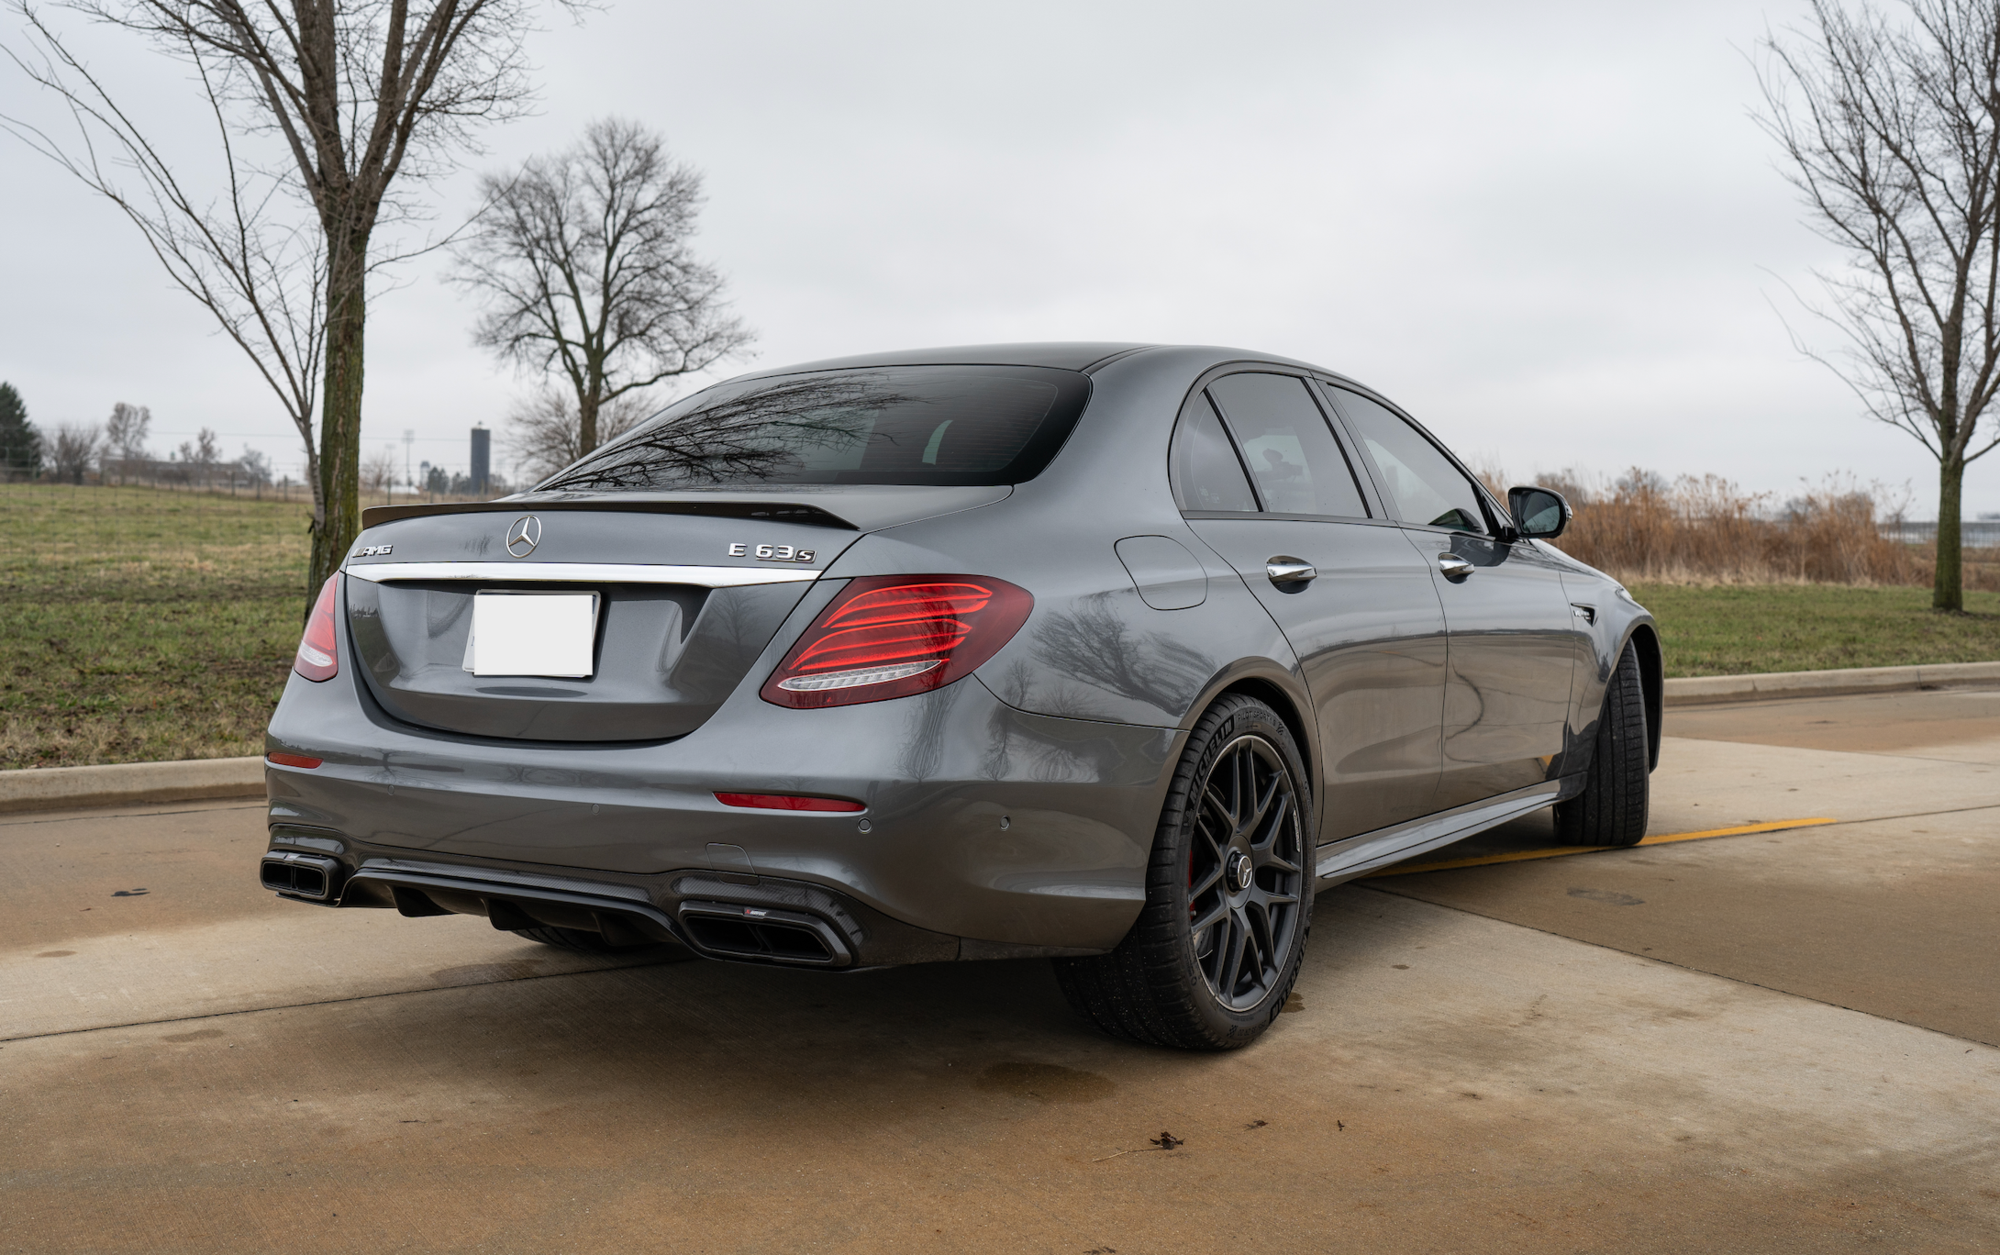 2020 Mercedes-Benz E63 AMG S - 2020 Mercedes-AMG E63S-High MSRP + Akrapovic and RENNtech Exhaust - Used - Rantoul, IL 61866, United States